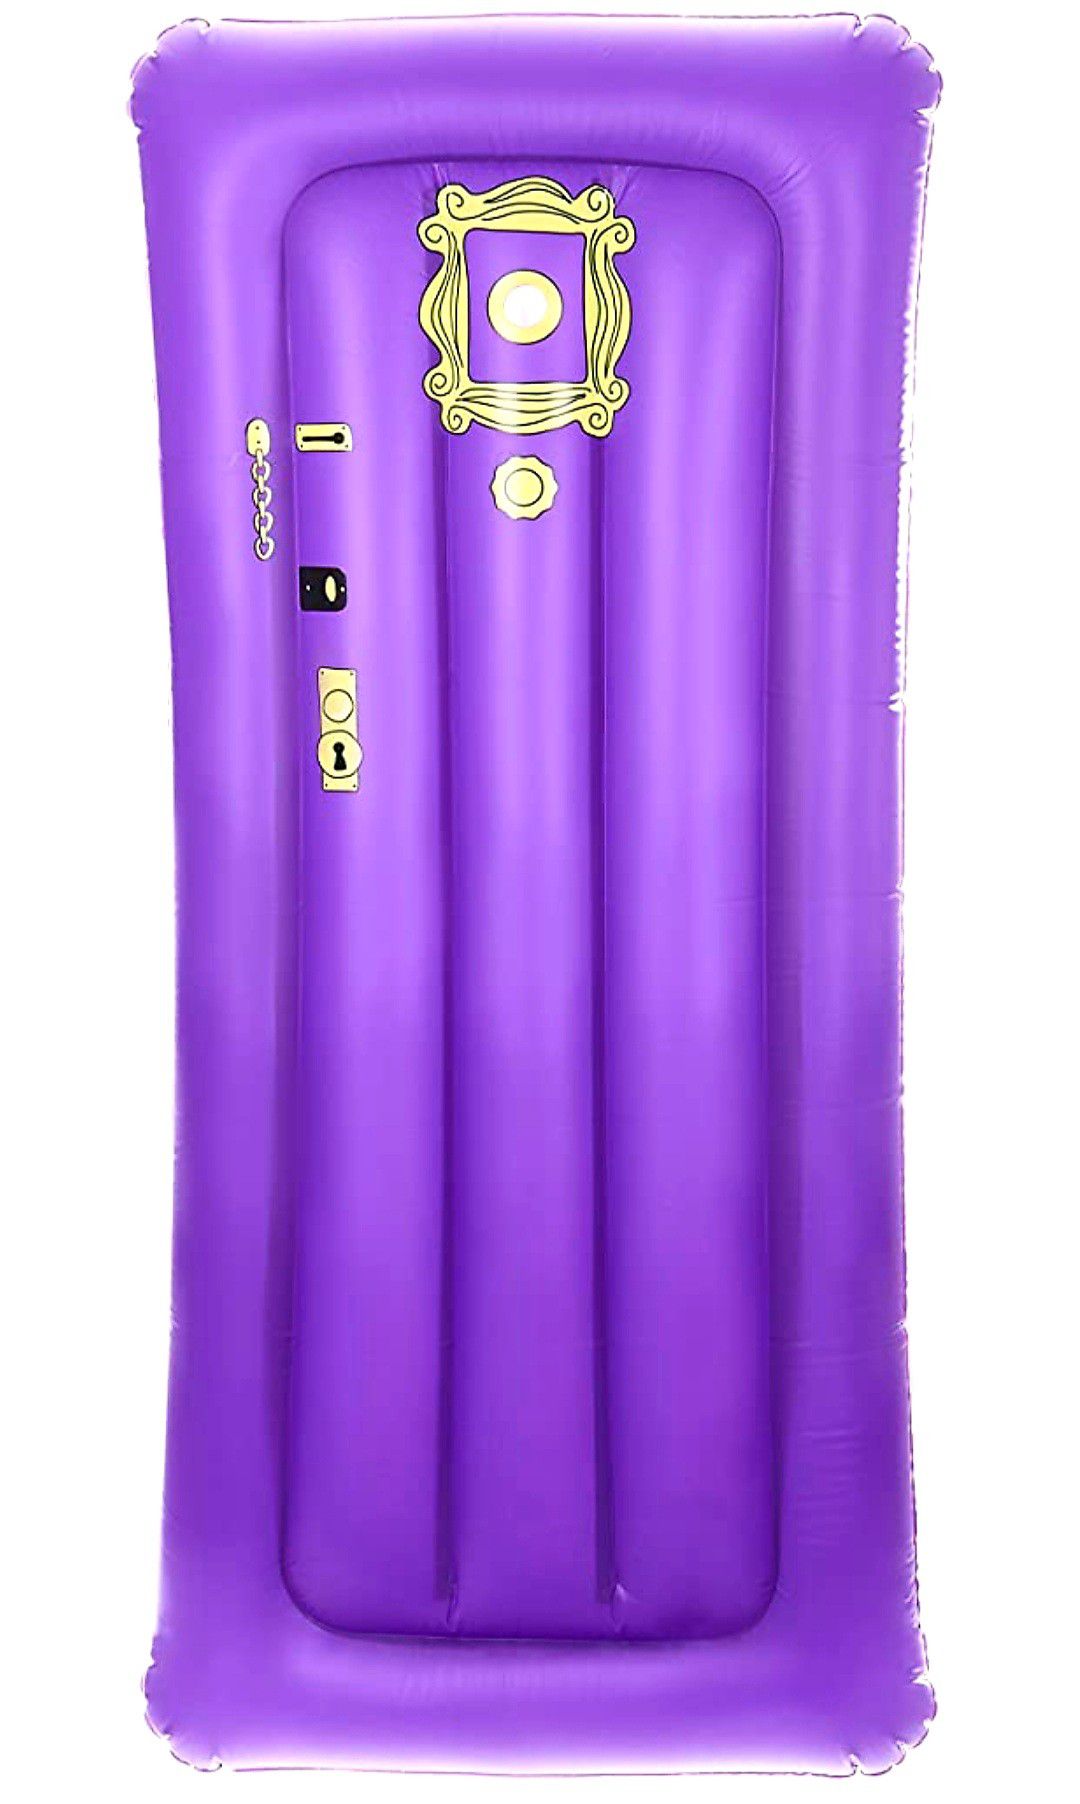 Friends TV Show , Friends Door Pool Float Lounger , 59 x 32" and holds up to 200 lbs.